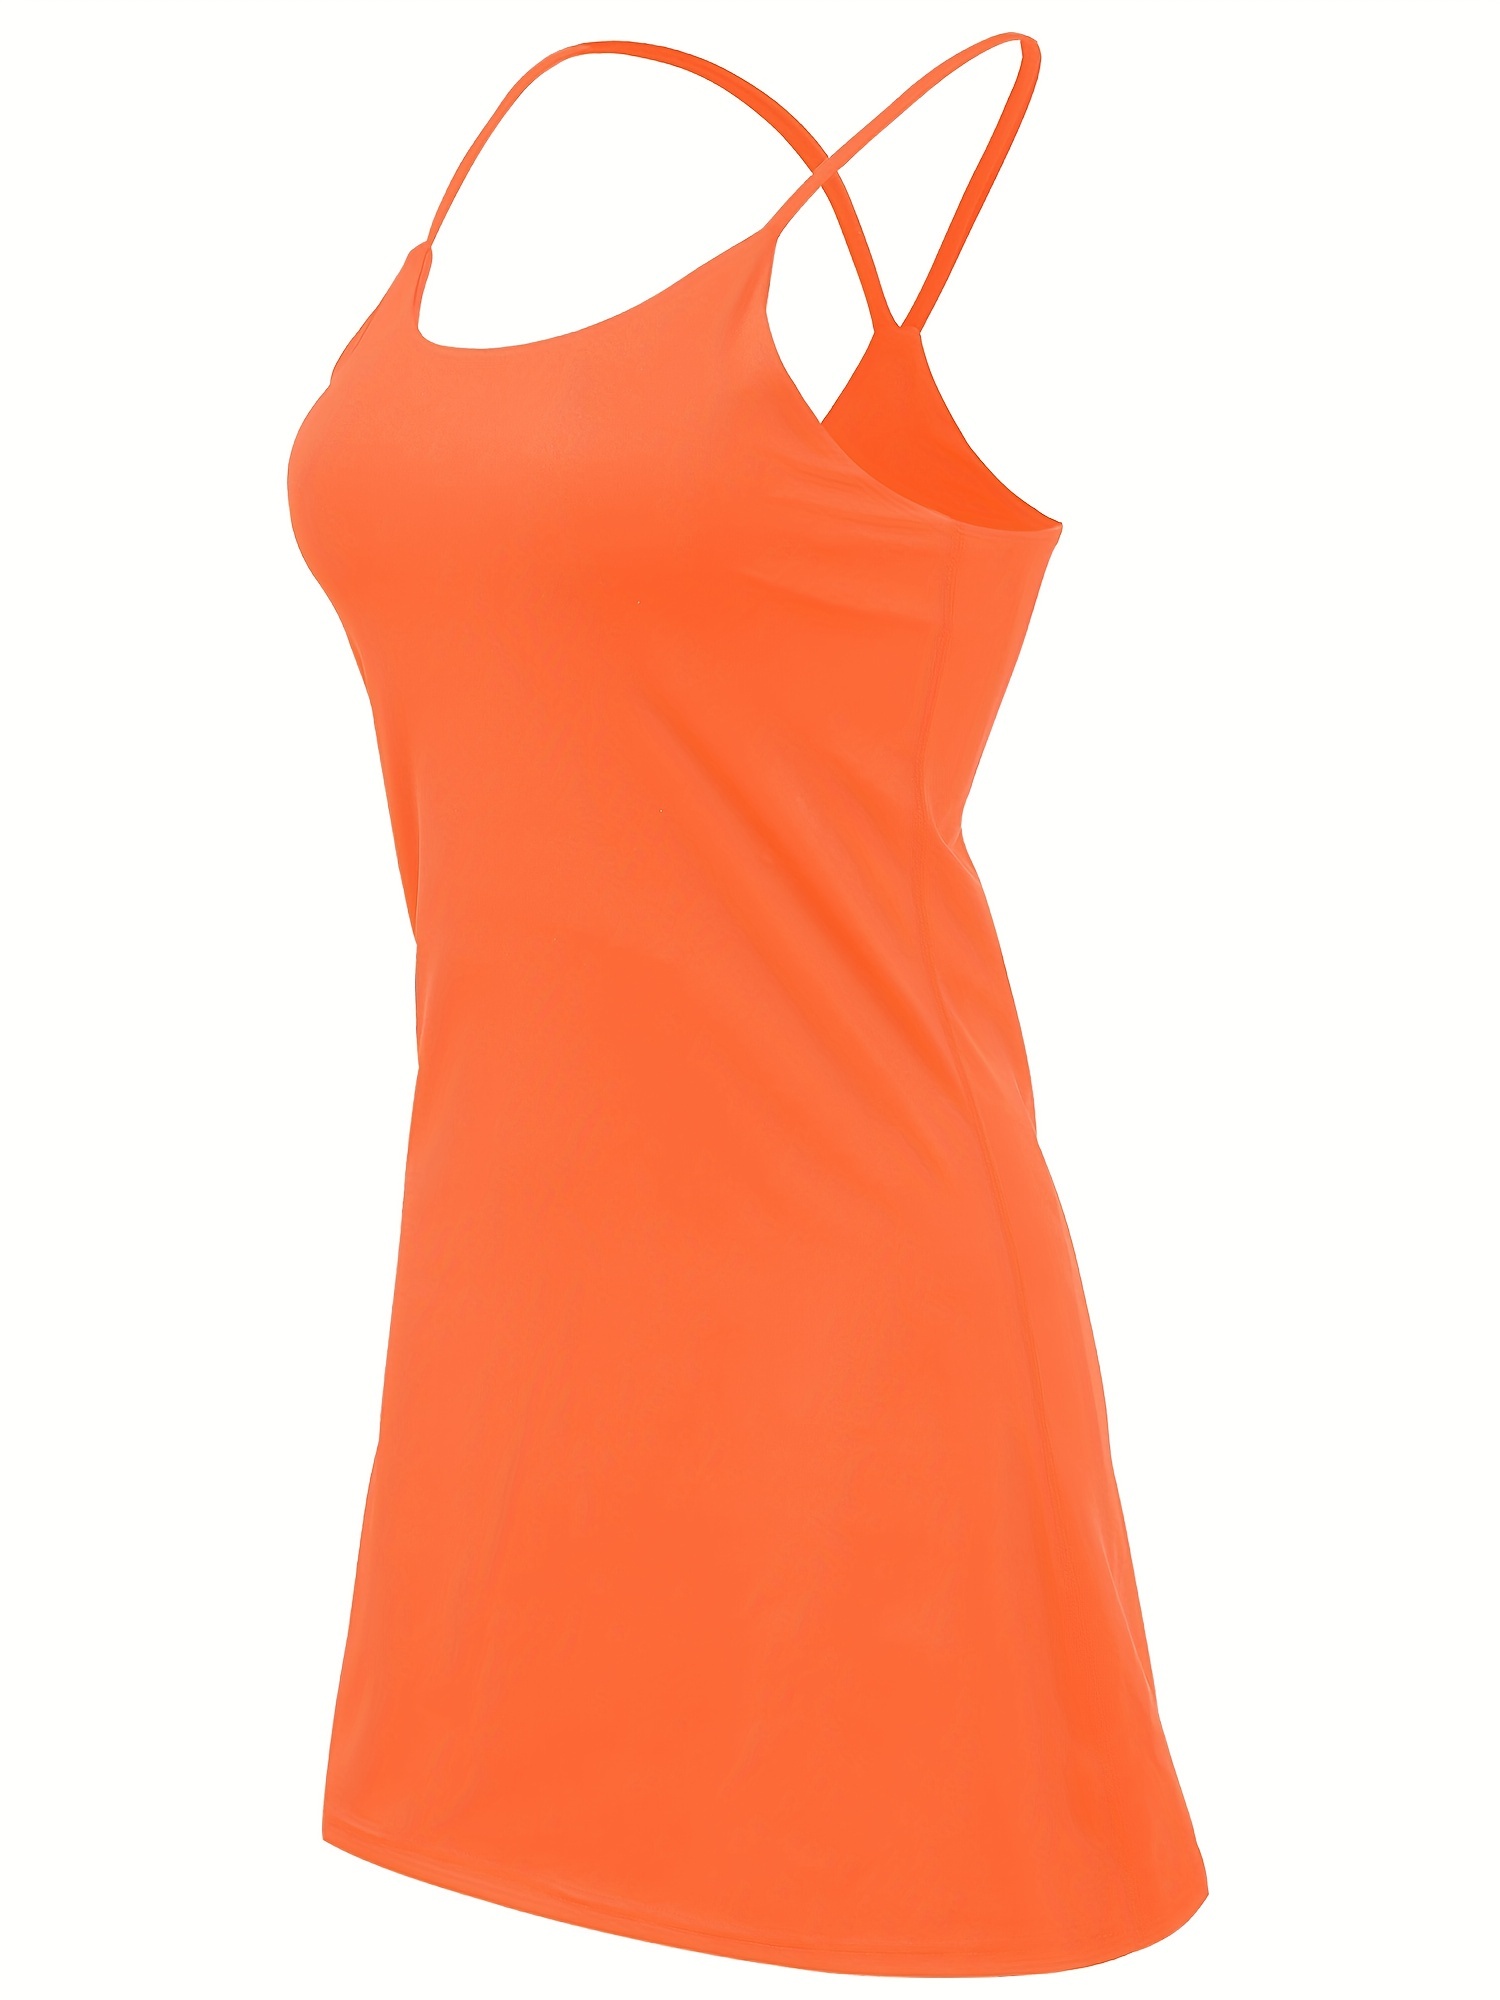 Women's Exercise Workout Dress with Built-in Bra & Shorts